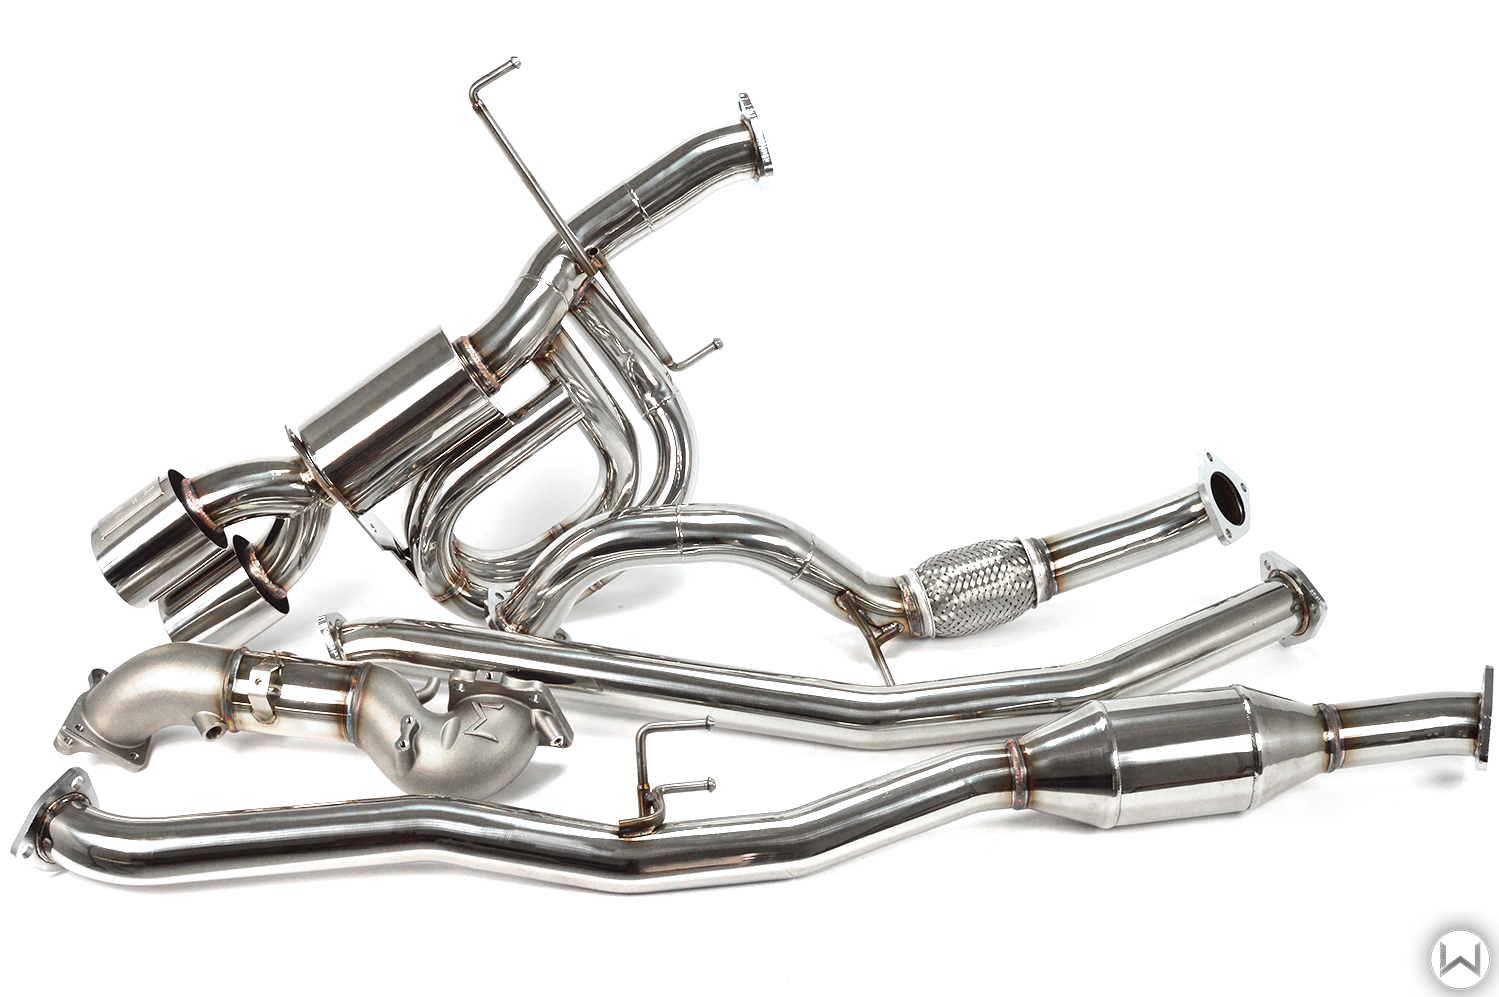 11th Gen Honda Civic 27WON 80mm down-pipe now available Civic Turboback exhaust catless (1)